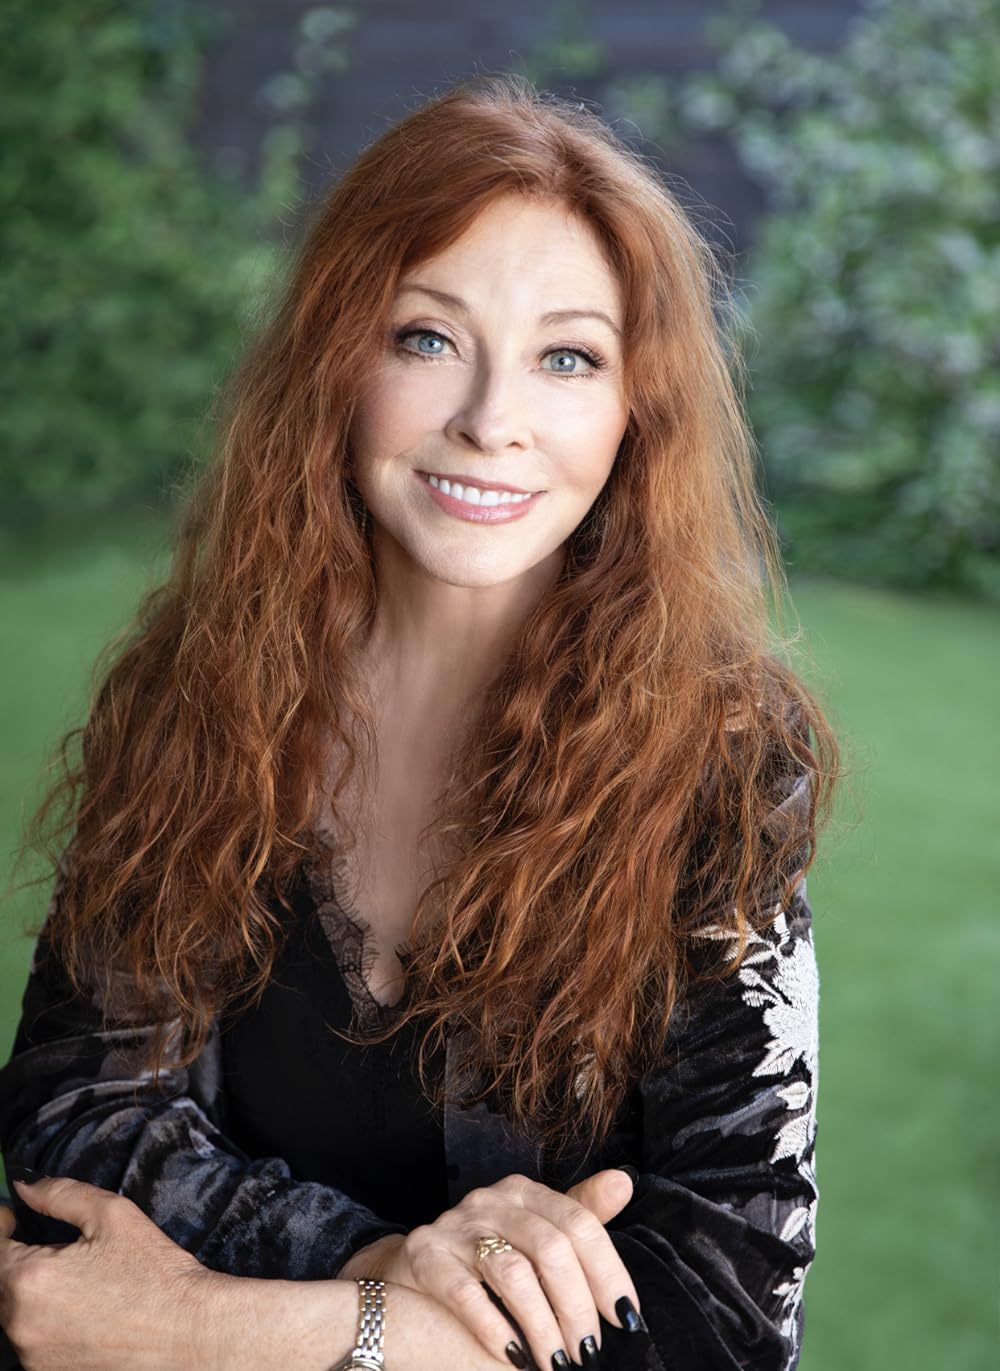 adam straw recommends cassandra peterson playboy pic